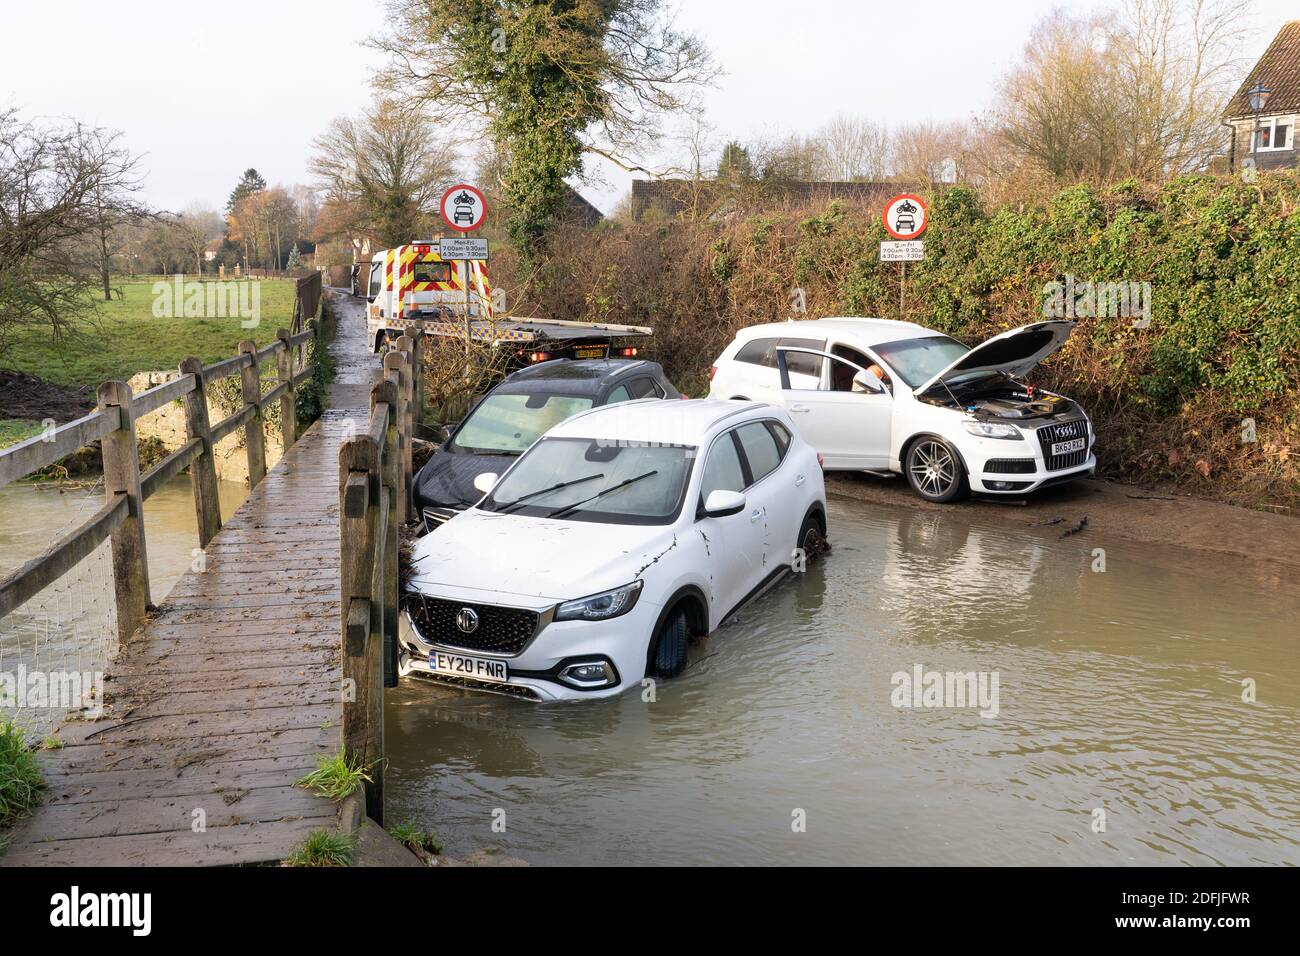 A recovery truck prepares to tow away stranded flooded vehicles at the ford in Much Hadham. Hertfordshire UK. December 2020 Stock Photo